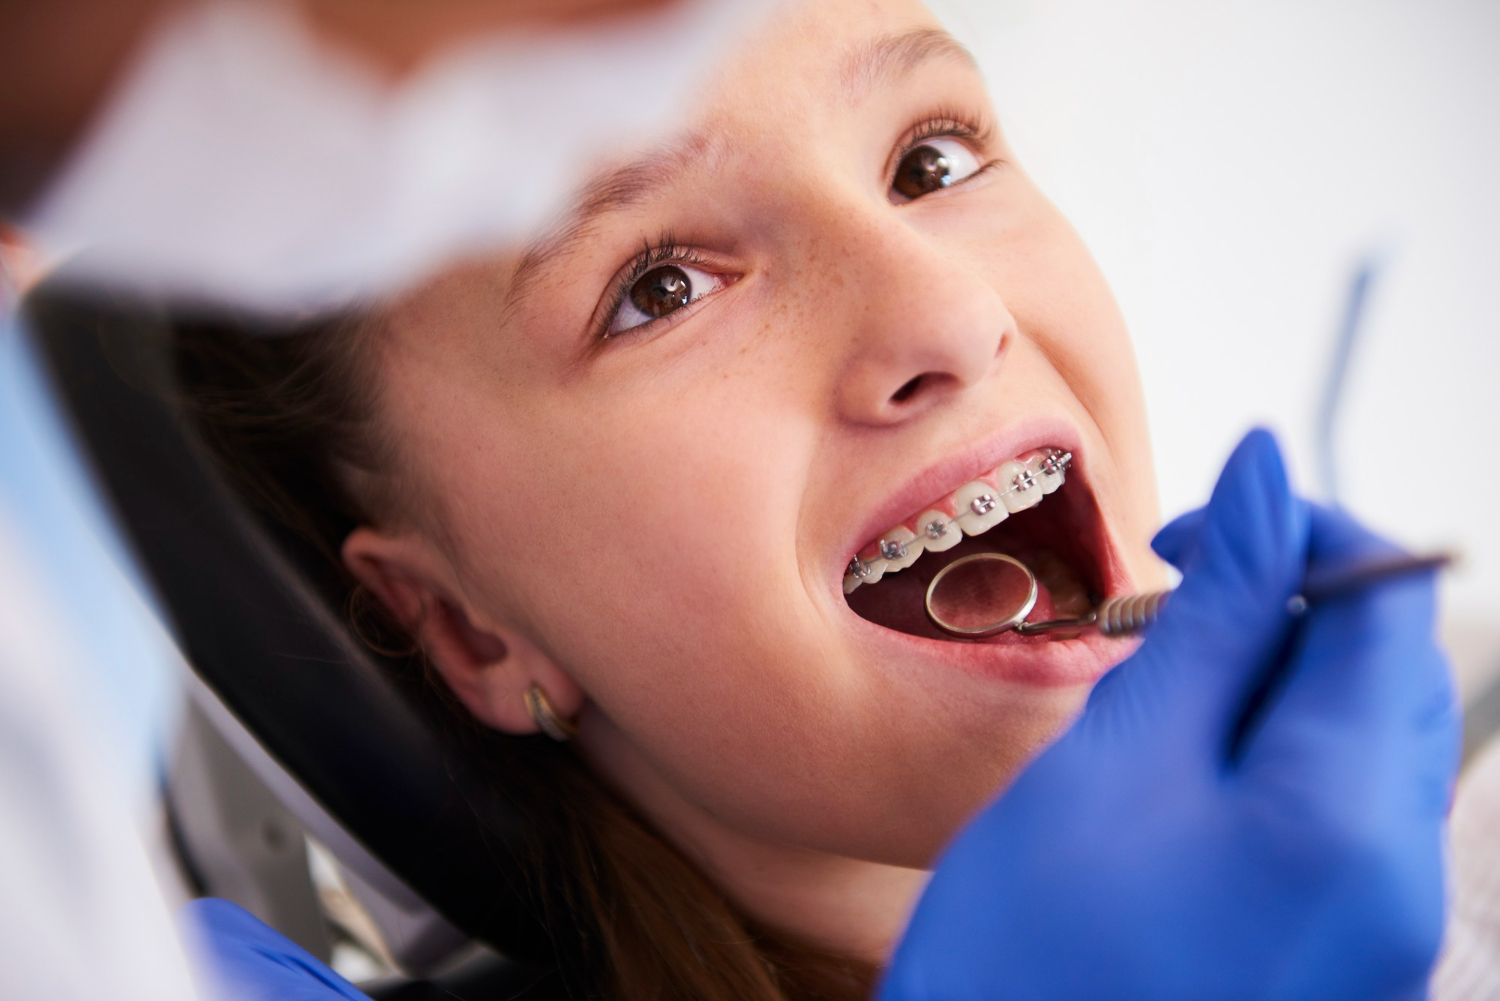 girl-with-braces-during-routine-dental-examination